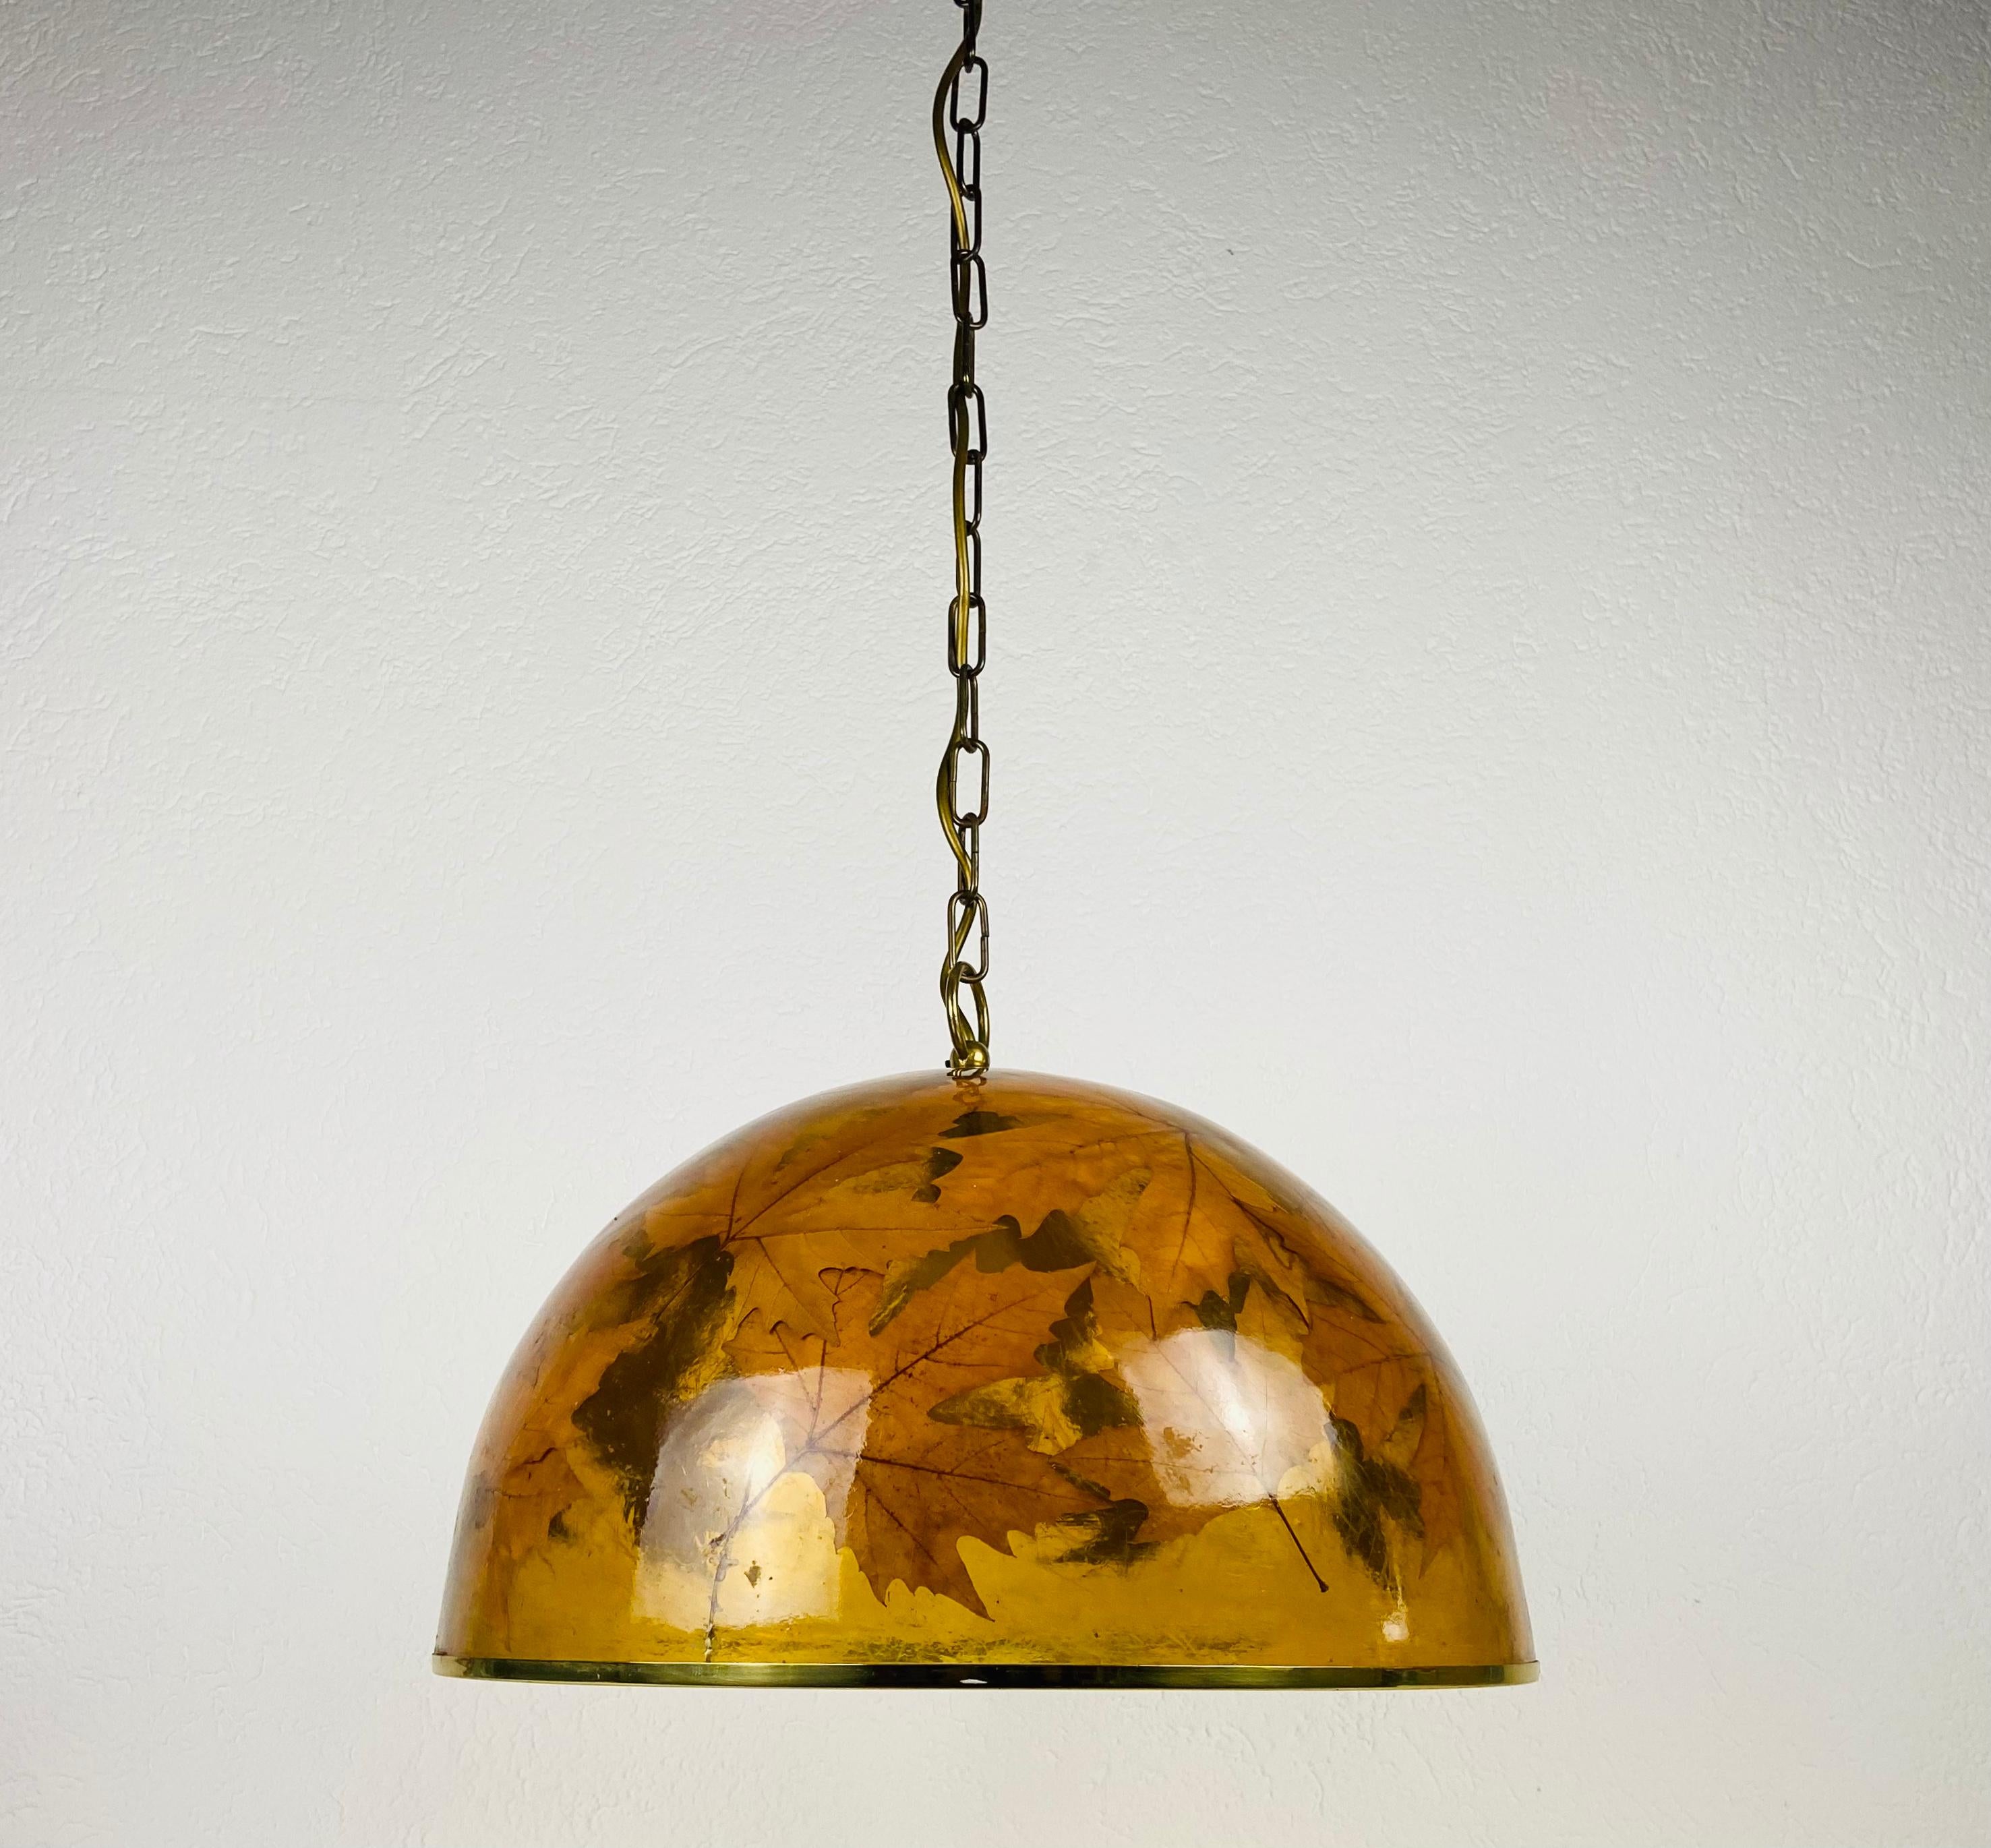 Midcentury Plexiglass Pendant Lamp with Real Leaves, Germany, 1960s In Good Condition For Sale In Hagenbach, DE